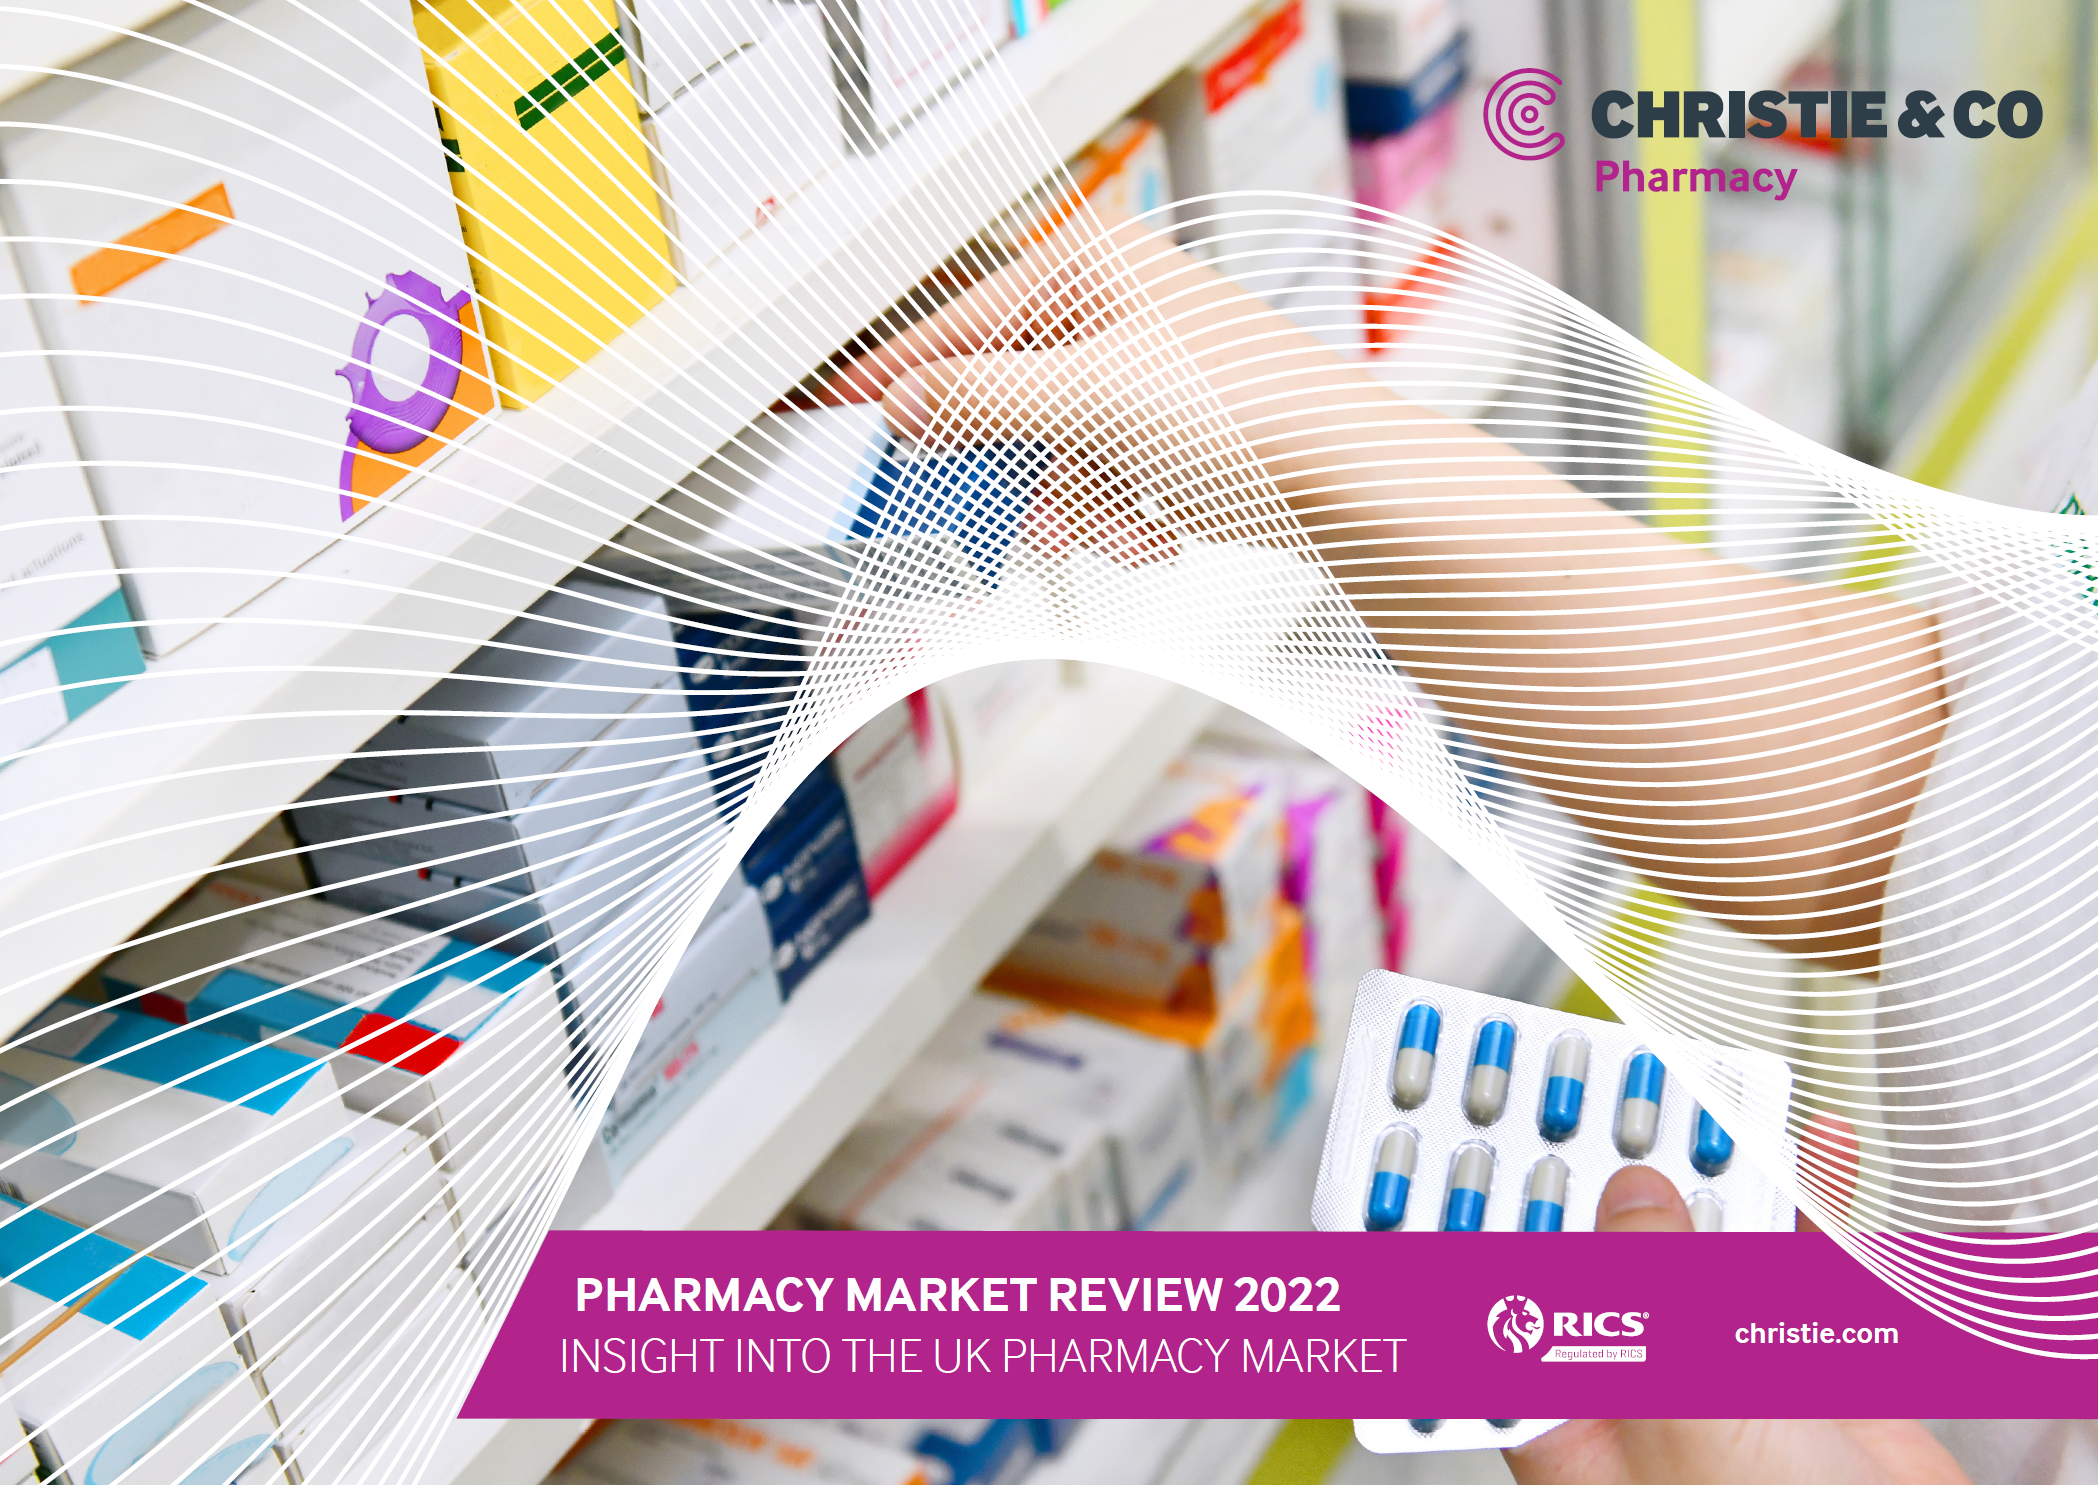 Christie & Co's Pharmacy Market Review 2022